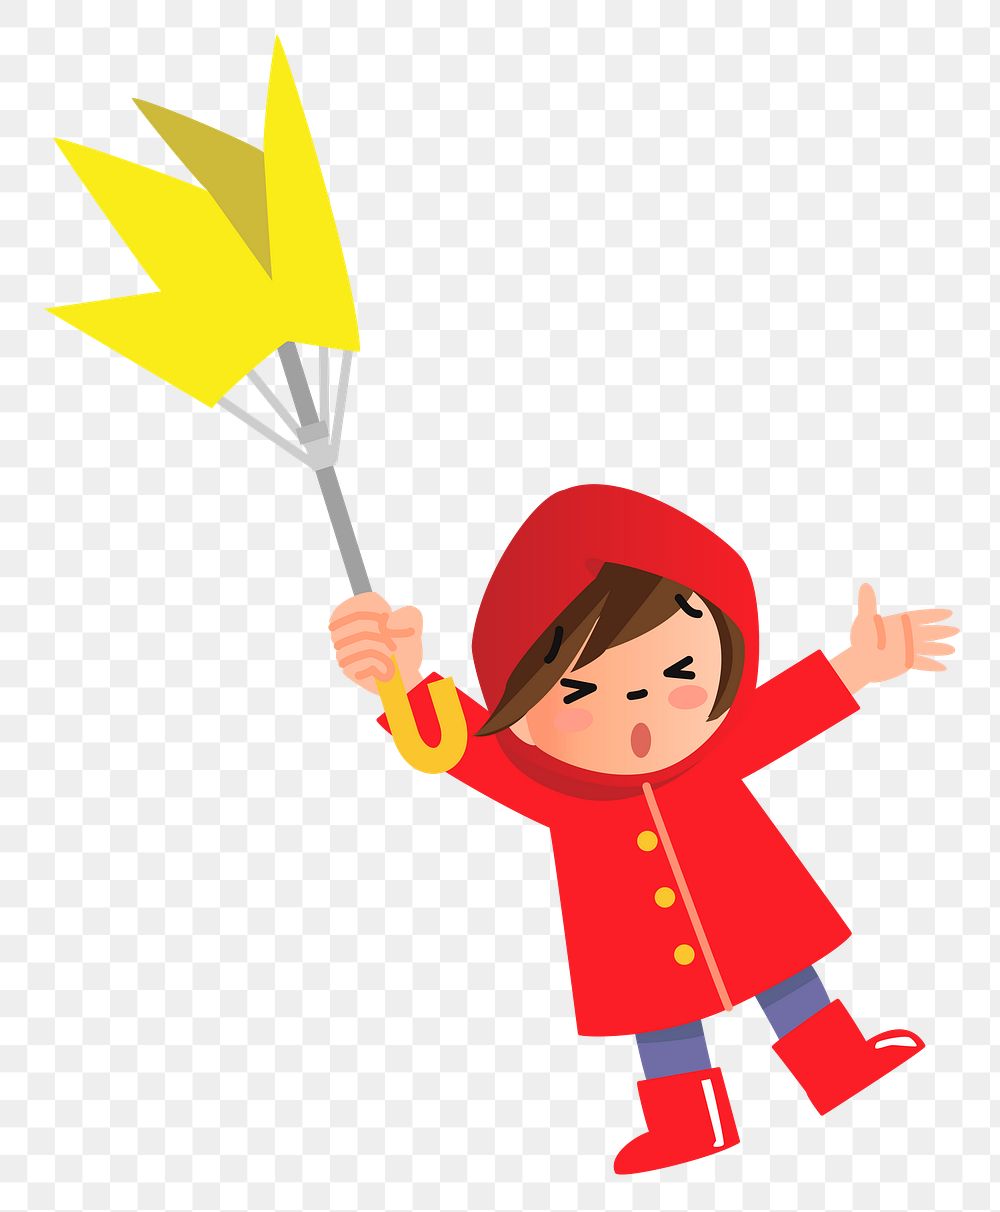 Kid with umbrella windy day png illustration, transparent background. Free public domain CC0 image.